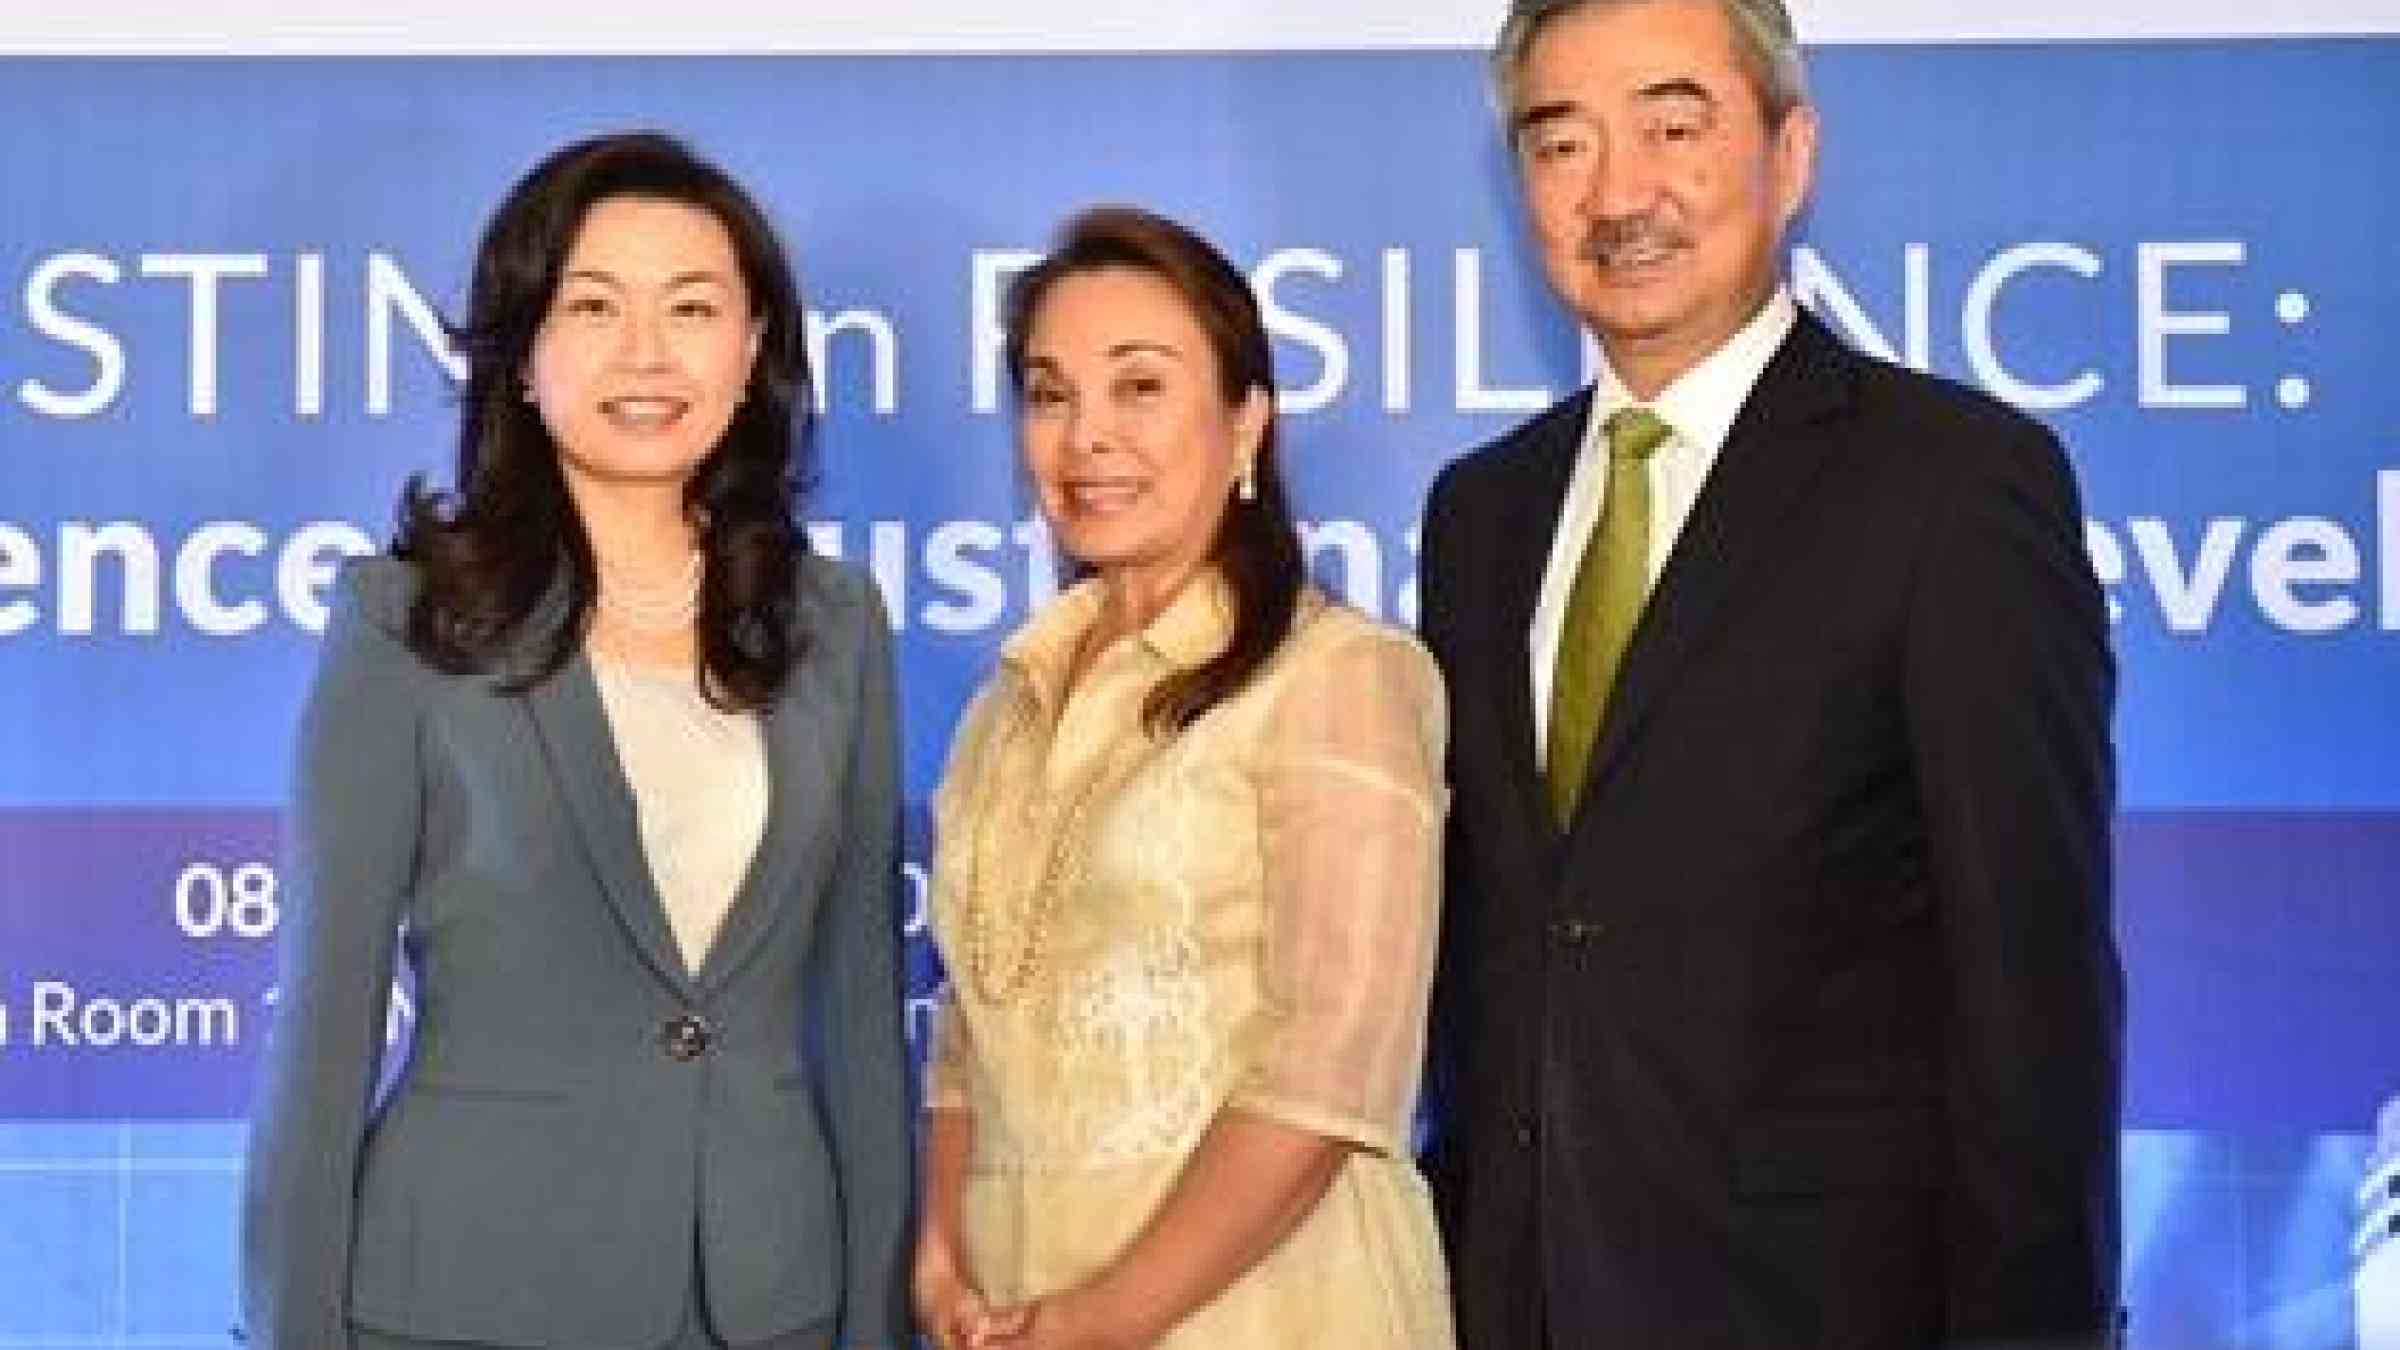 ARISE board members Ms. Sandra Wu (left) and Mr. Hans Sy with UNISDR Champion Senator Loren Legarda at the 5th Top Leaders Forum in Manila, which underlined the key role of public-private partnership in increasing disaster resilience (Photo: ARISE Philippines)